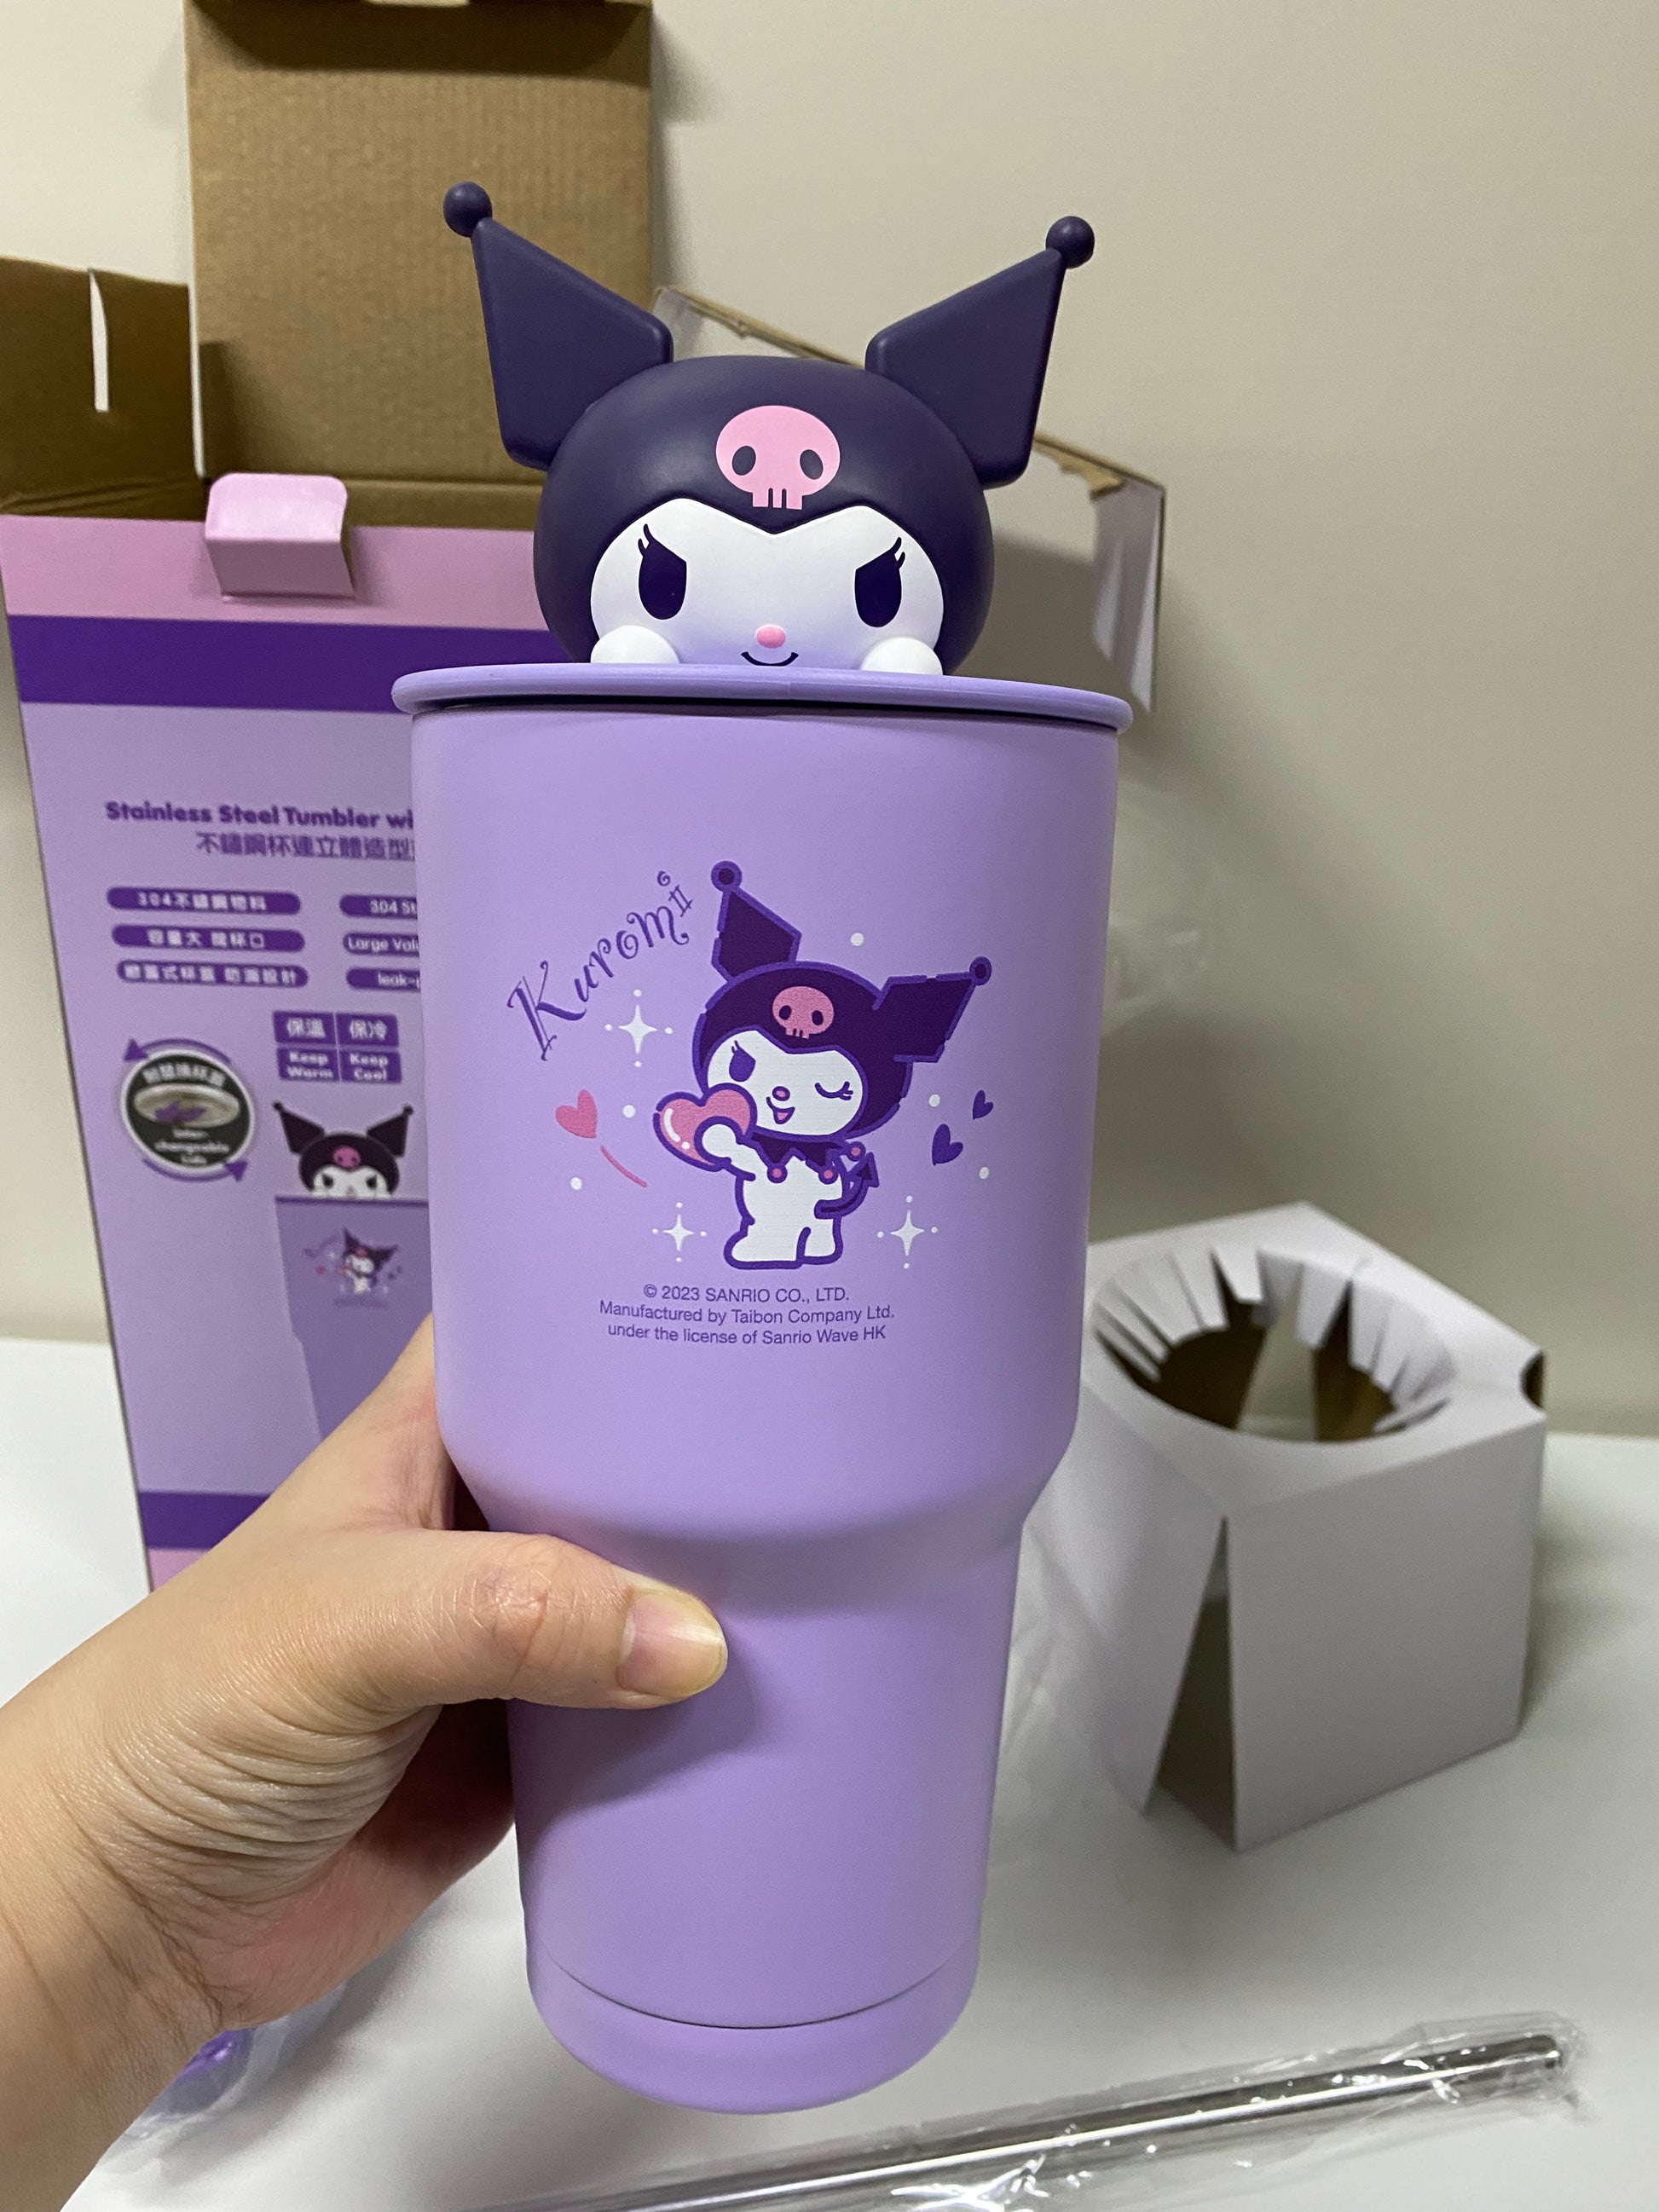 Stainless Steel Tumbler with 3D Lid 900ml | Sanrio Kuromi - Keep Warm & Cool Cup Kitchenware Kitchen